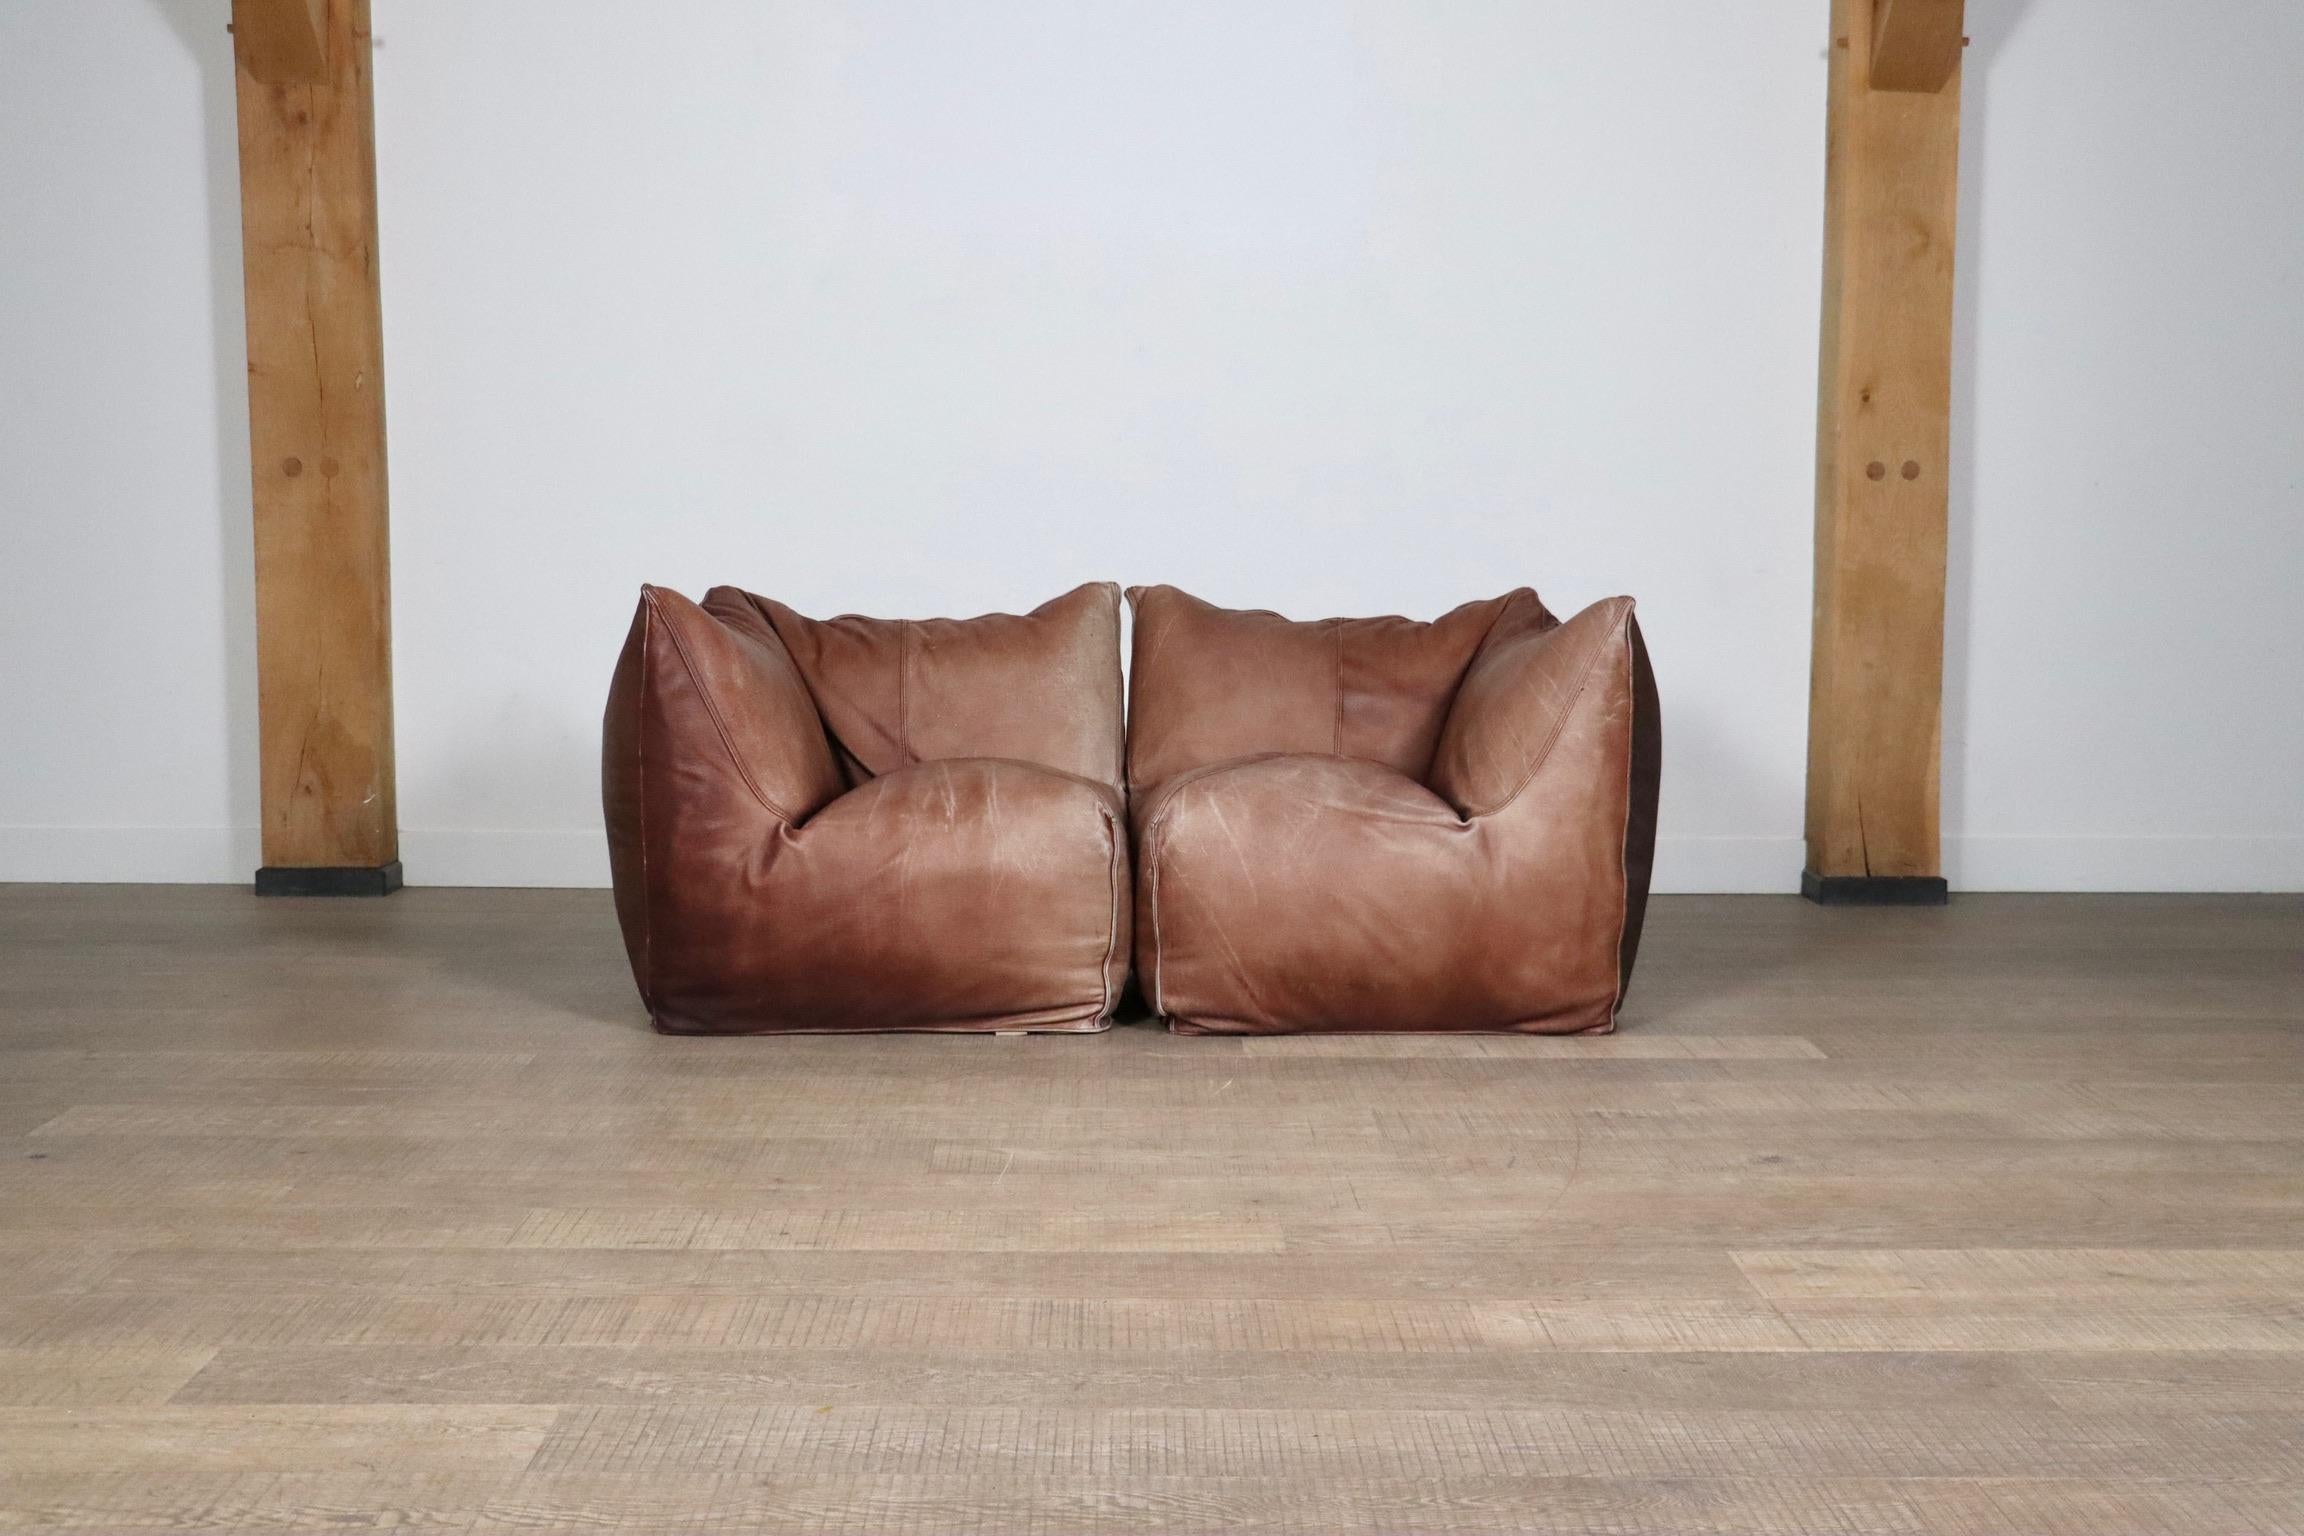 Fantastic pair of “Le Bambole” modular sofa elements designed by Mario Bellini for B & B Italia in the 1970s. A beautiful edition in its original high quality light brown buffalo neck leather with nice overall patina and a beautiful texture. These